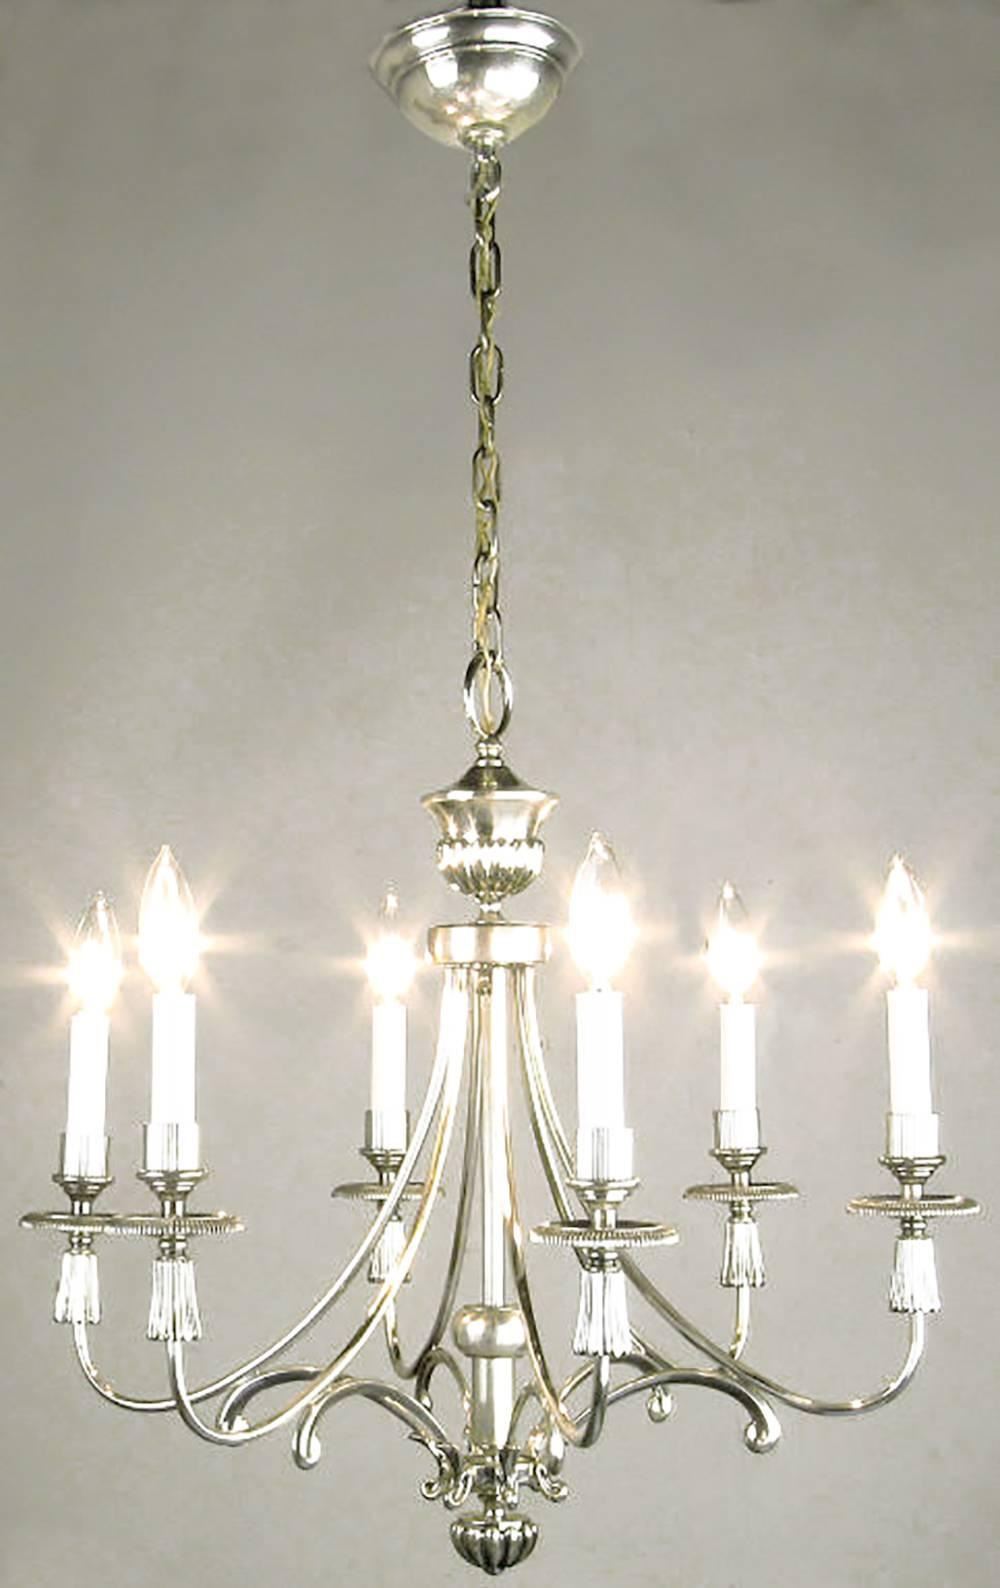 Silver-plated six-arm Regency chandelier from Lightolier. Certain characteristics are similar to the design elements of Parzinger's work for Lightolier. Specifically, the silver table lamps and table top torcheres Lightolier marketed in the 1950s.